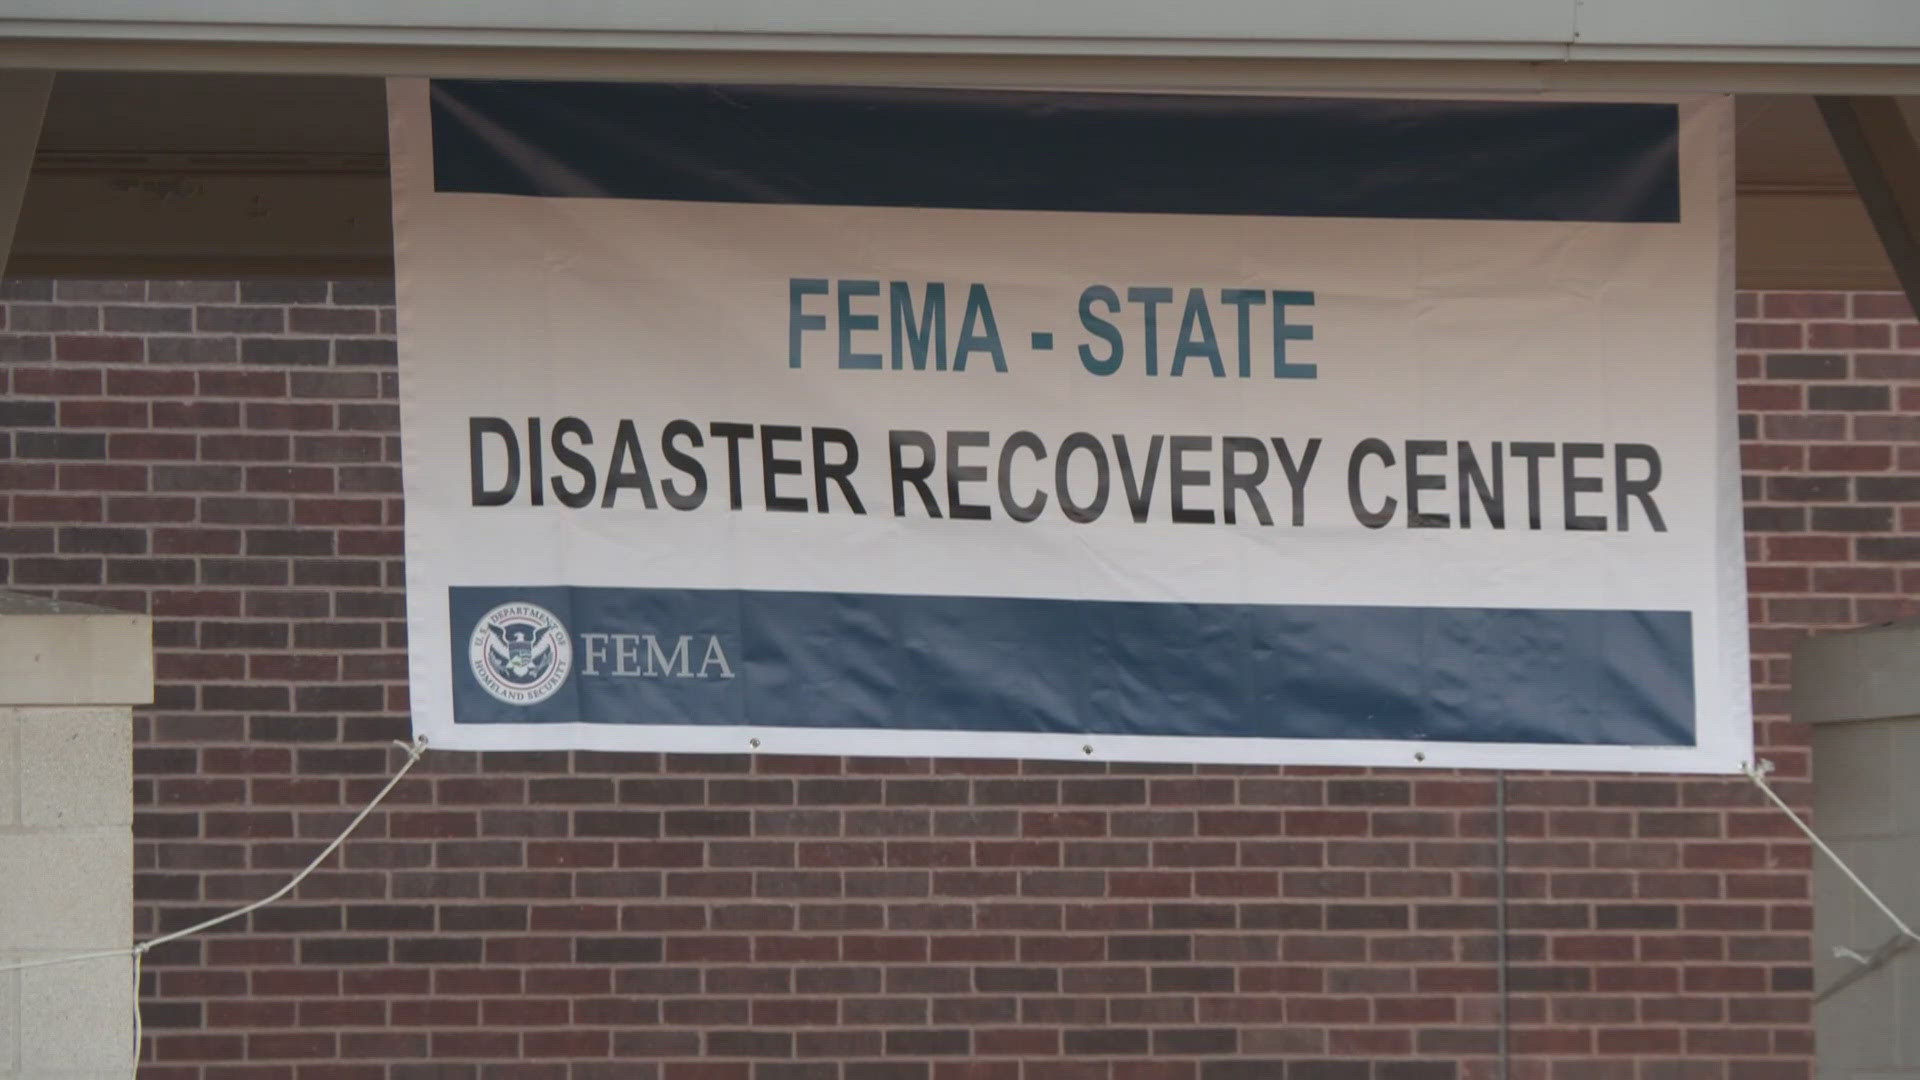 Workers are helping storm victims get the help they need to recover.